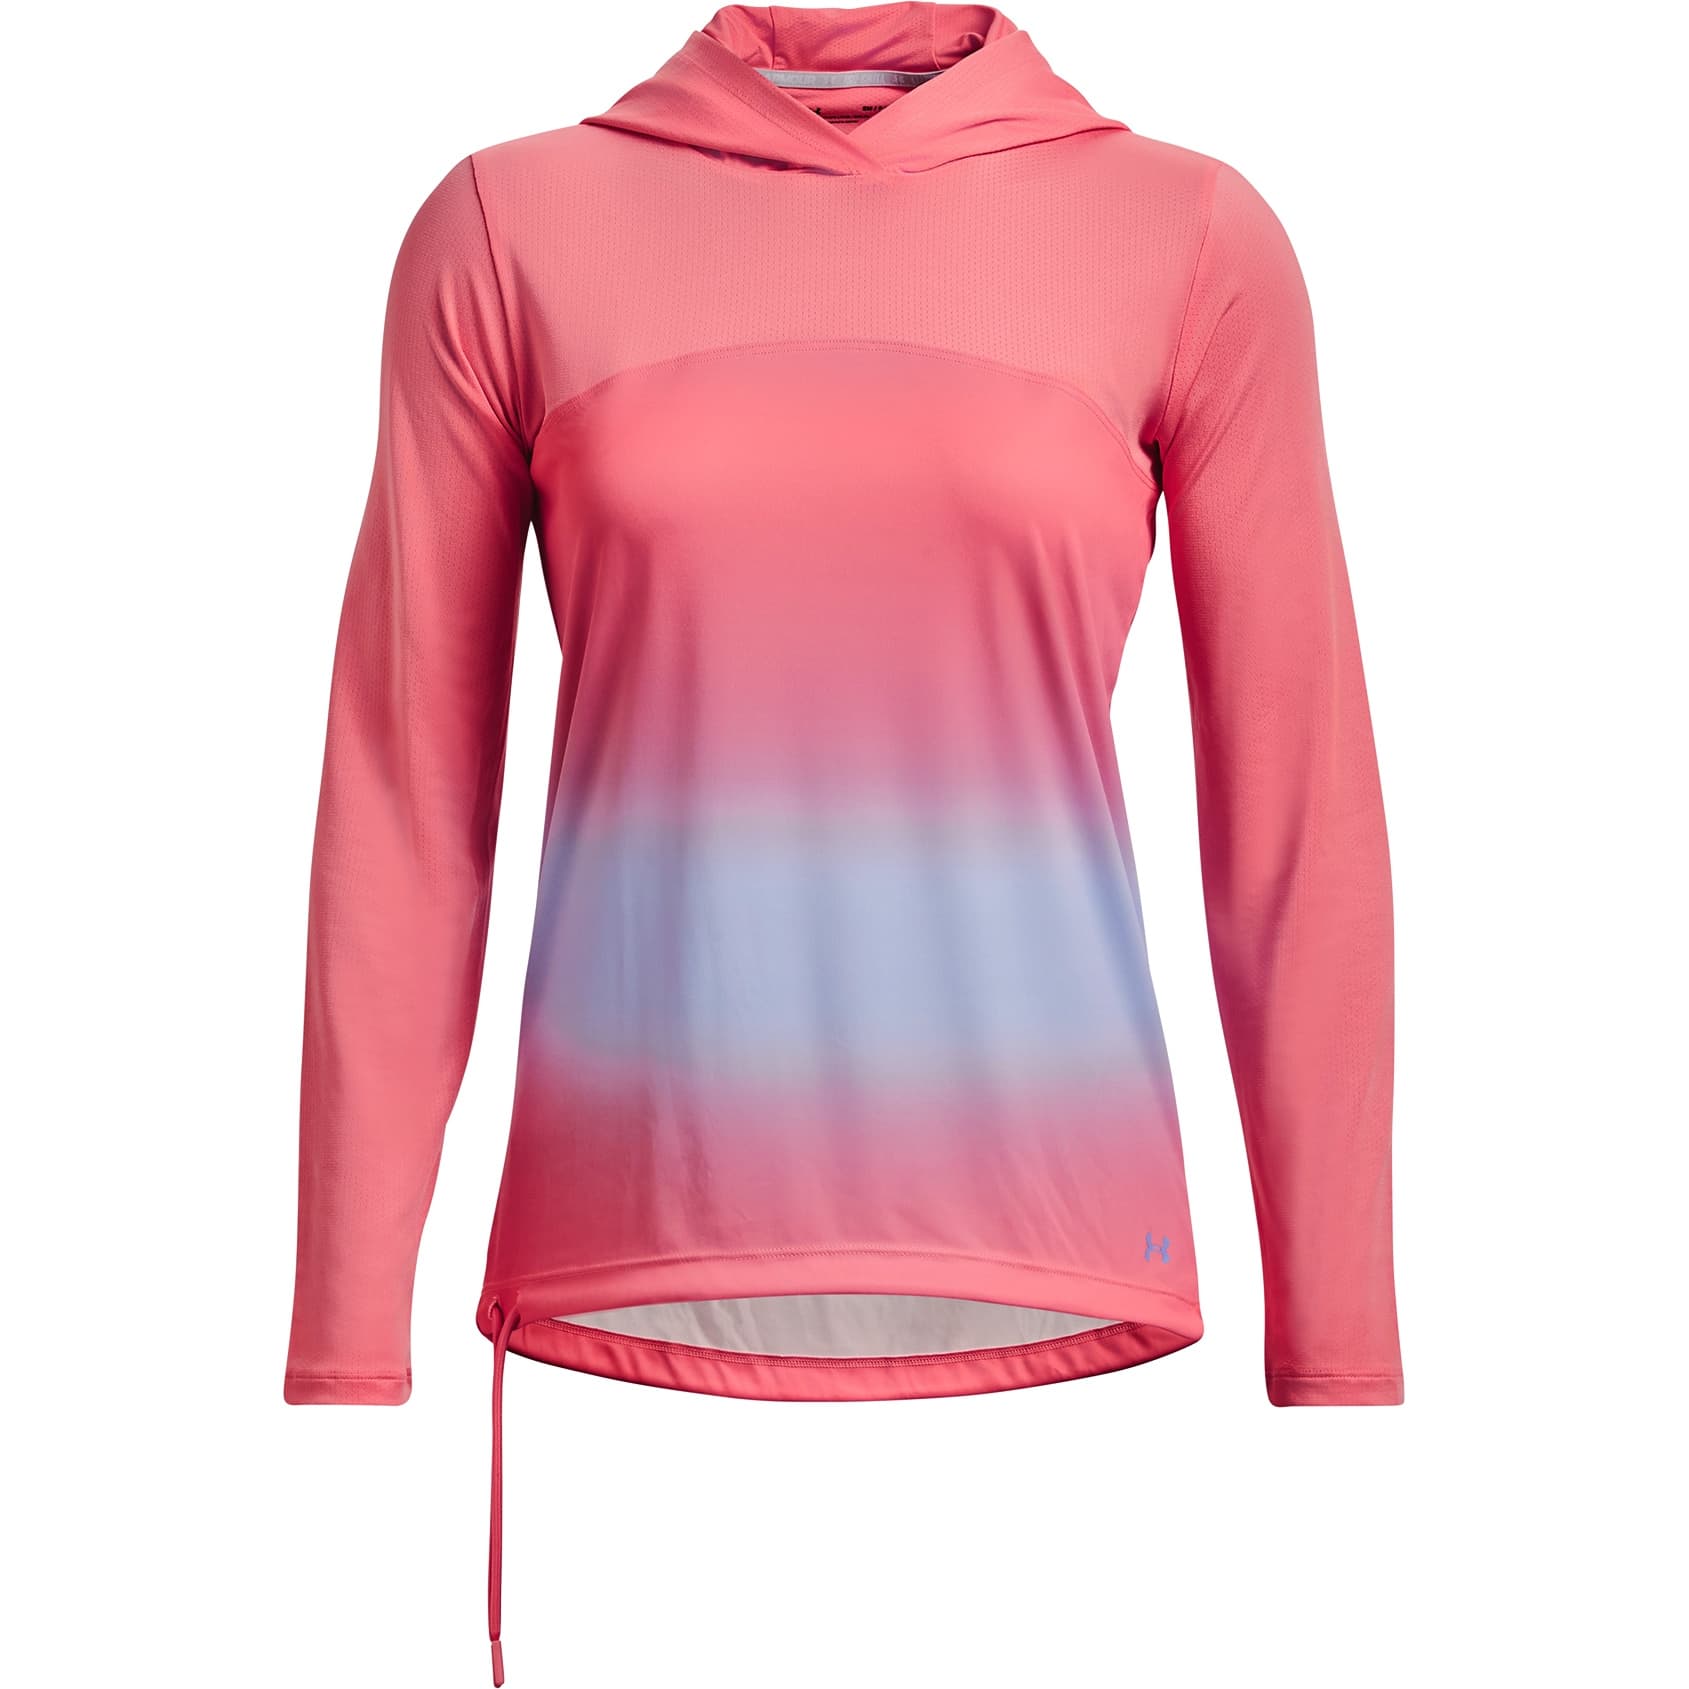 Under Armour® Women’s Iso-Chill Long-Sleeve Shirt